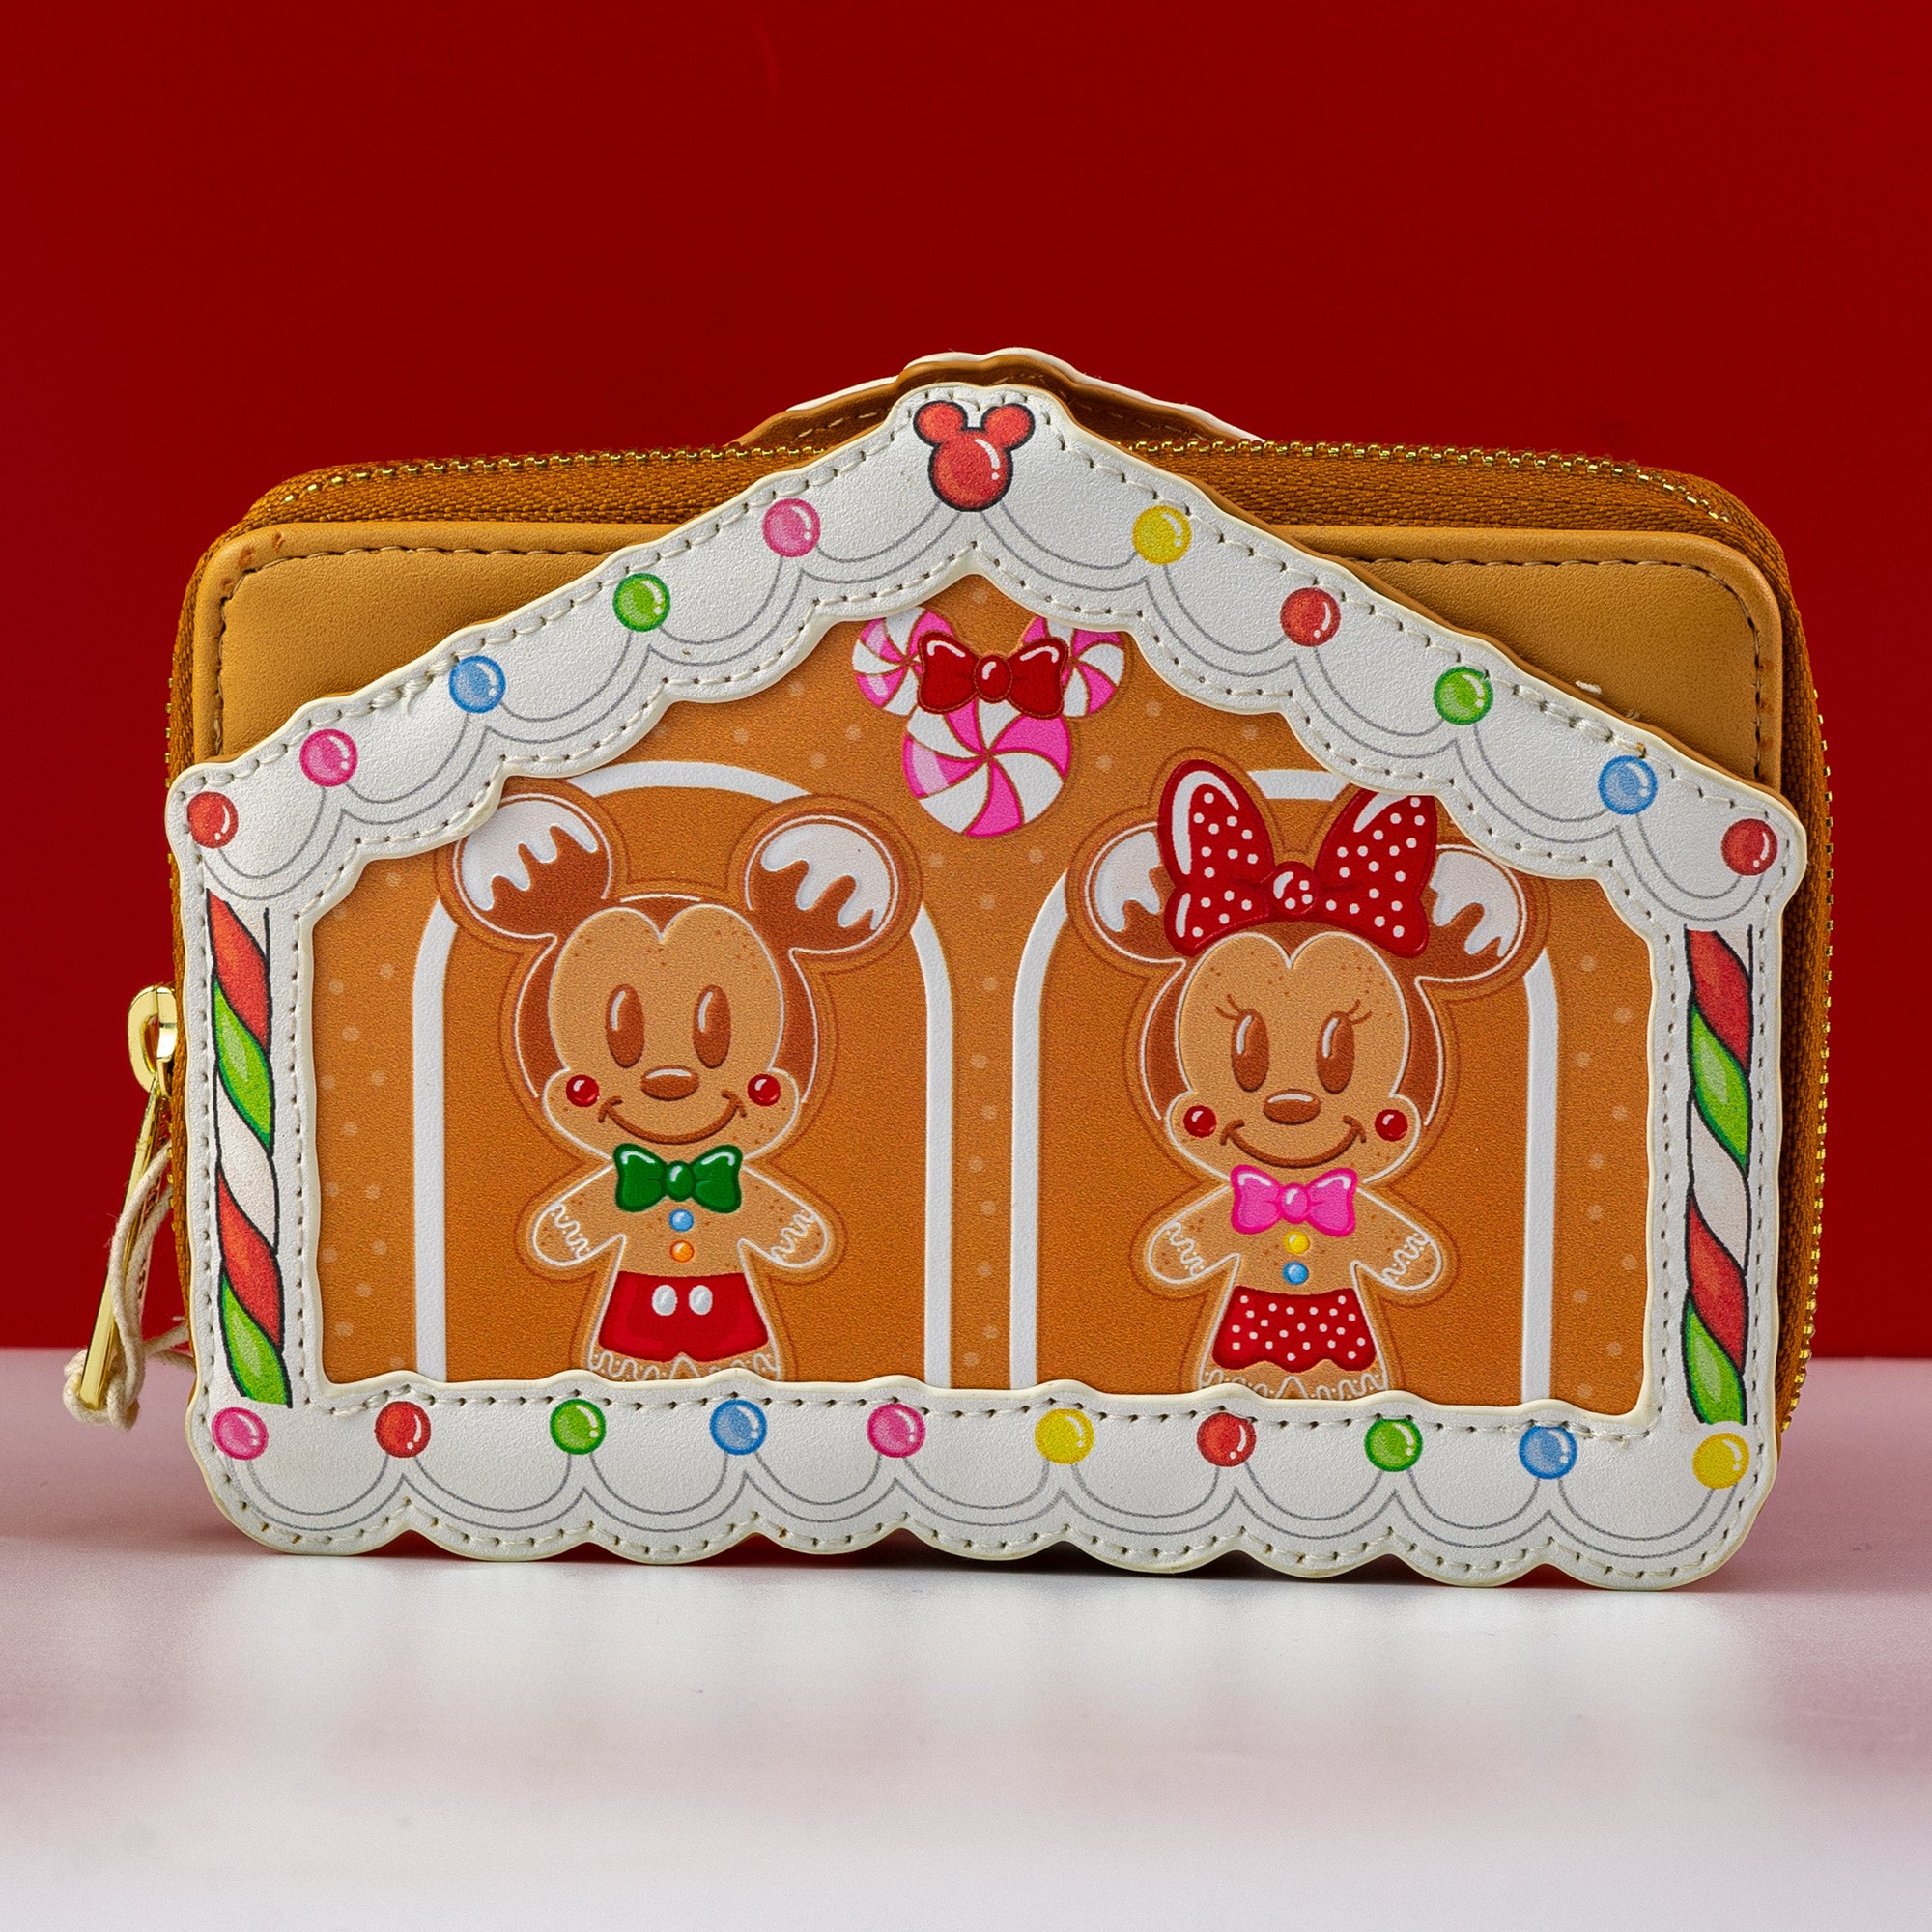 Loungefly x Disney Mickey and Friends Gingerbread House Wallet